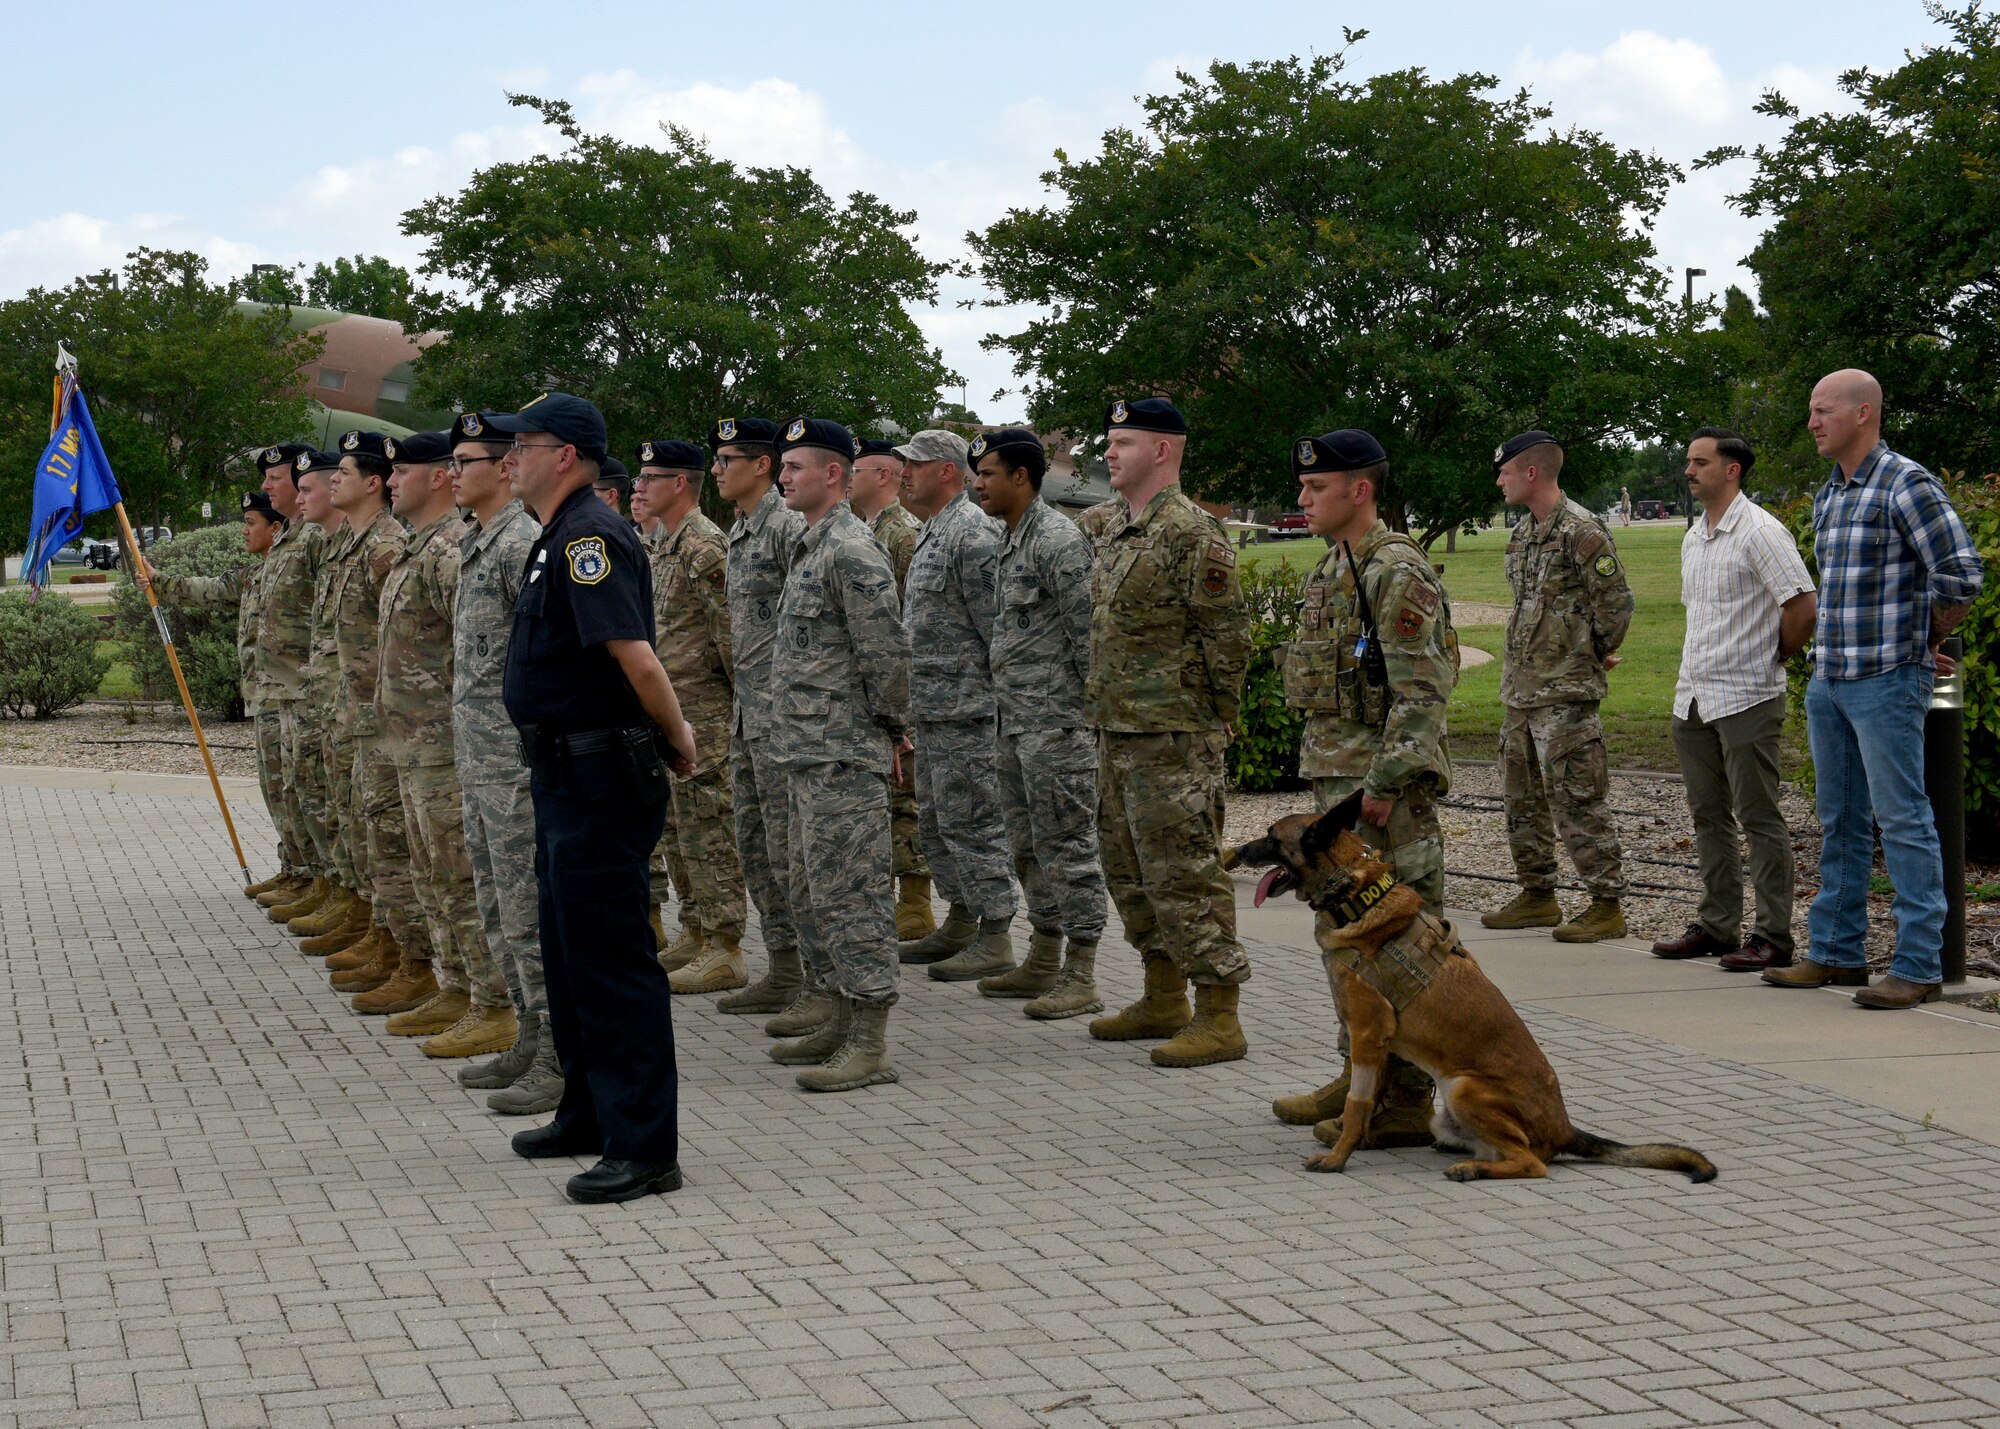 U.S. Air Force 17th Security Forces Squadron prepares for the special Retreat Ceremony on Goodfellow Air Force Base, Texas, May 17, 2019. This ceremony signified the end of Police Week while allowing members to honor the flag and fallen. (U.S. Air Force photo by Airman 1st Class Robyn Hunsinger/released)